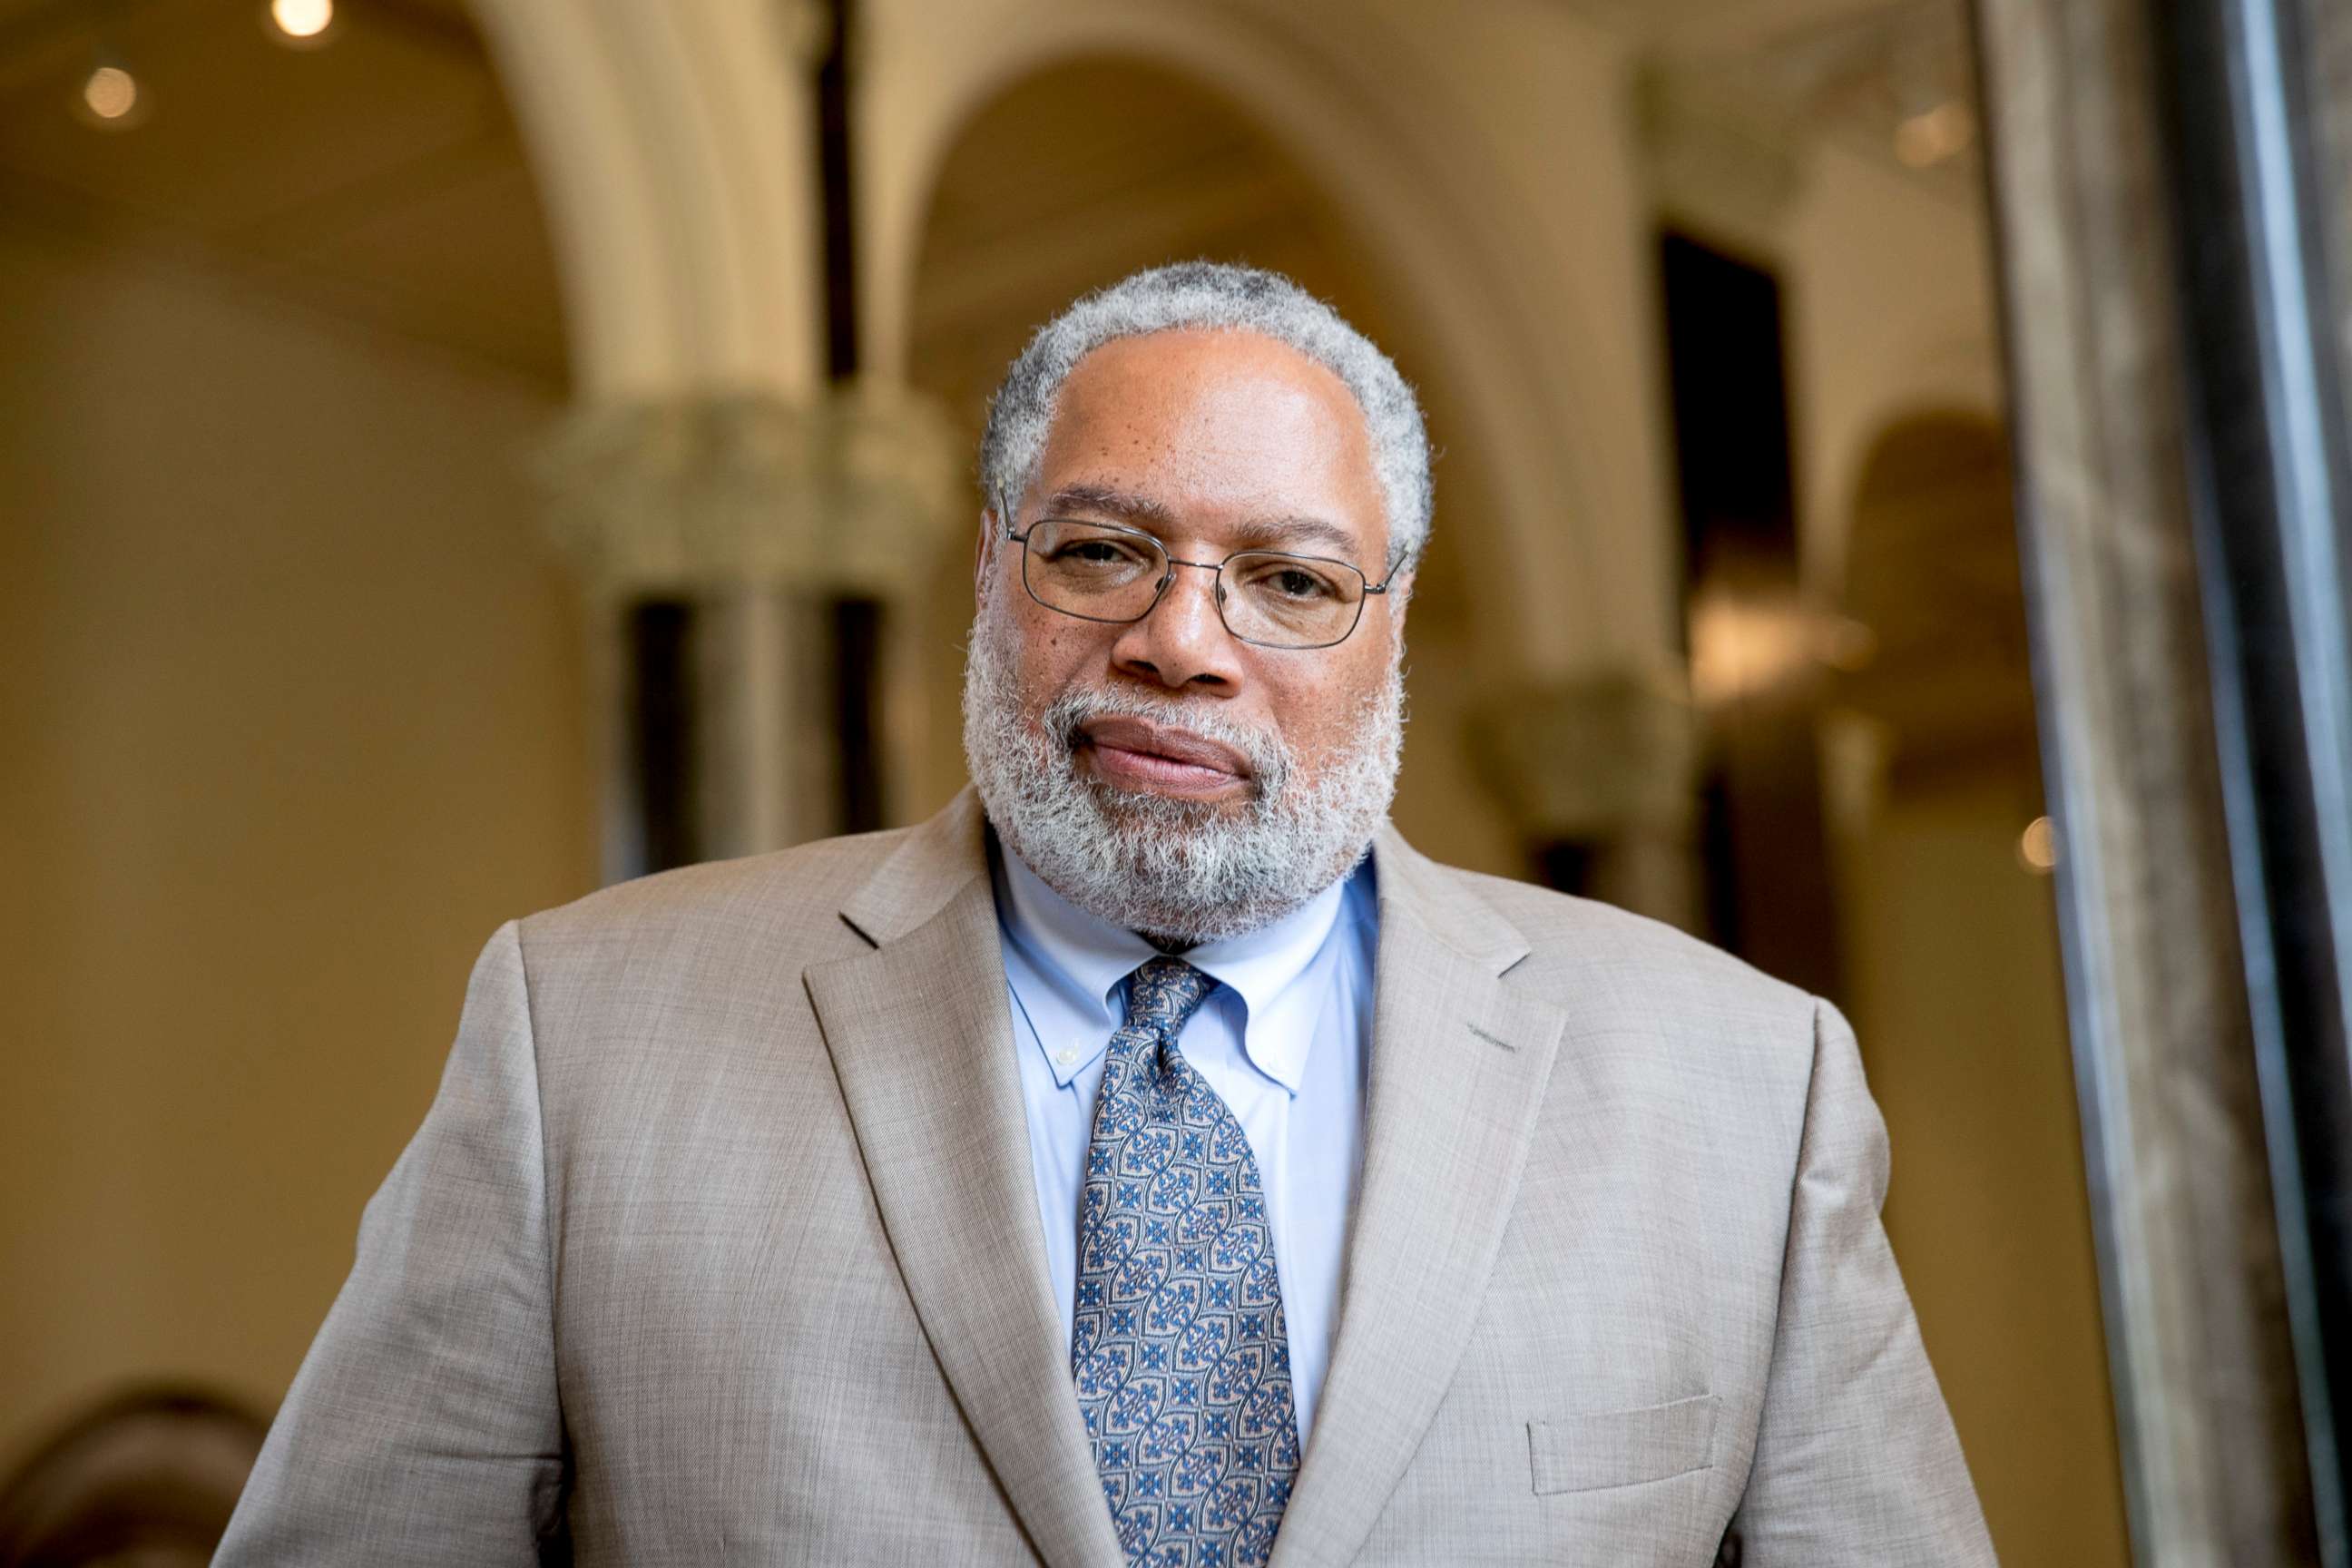 PHOTO: Lonnie Bunch, founding director of the Smithsonian's National Museum of African American History and Culture, poses for a photograph at the Smithsonian Castle in Washington, May 28, 2019.